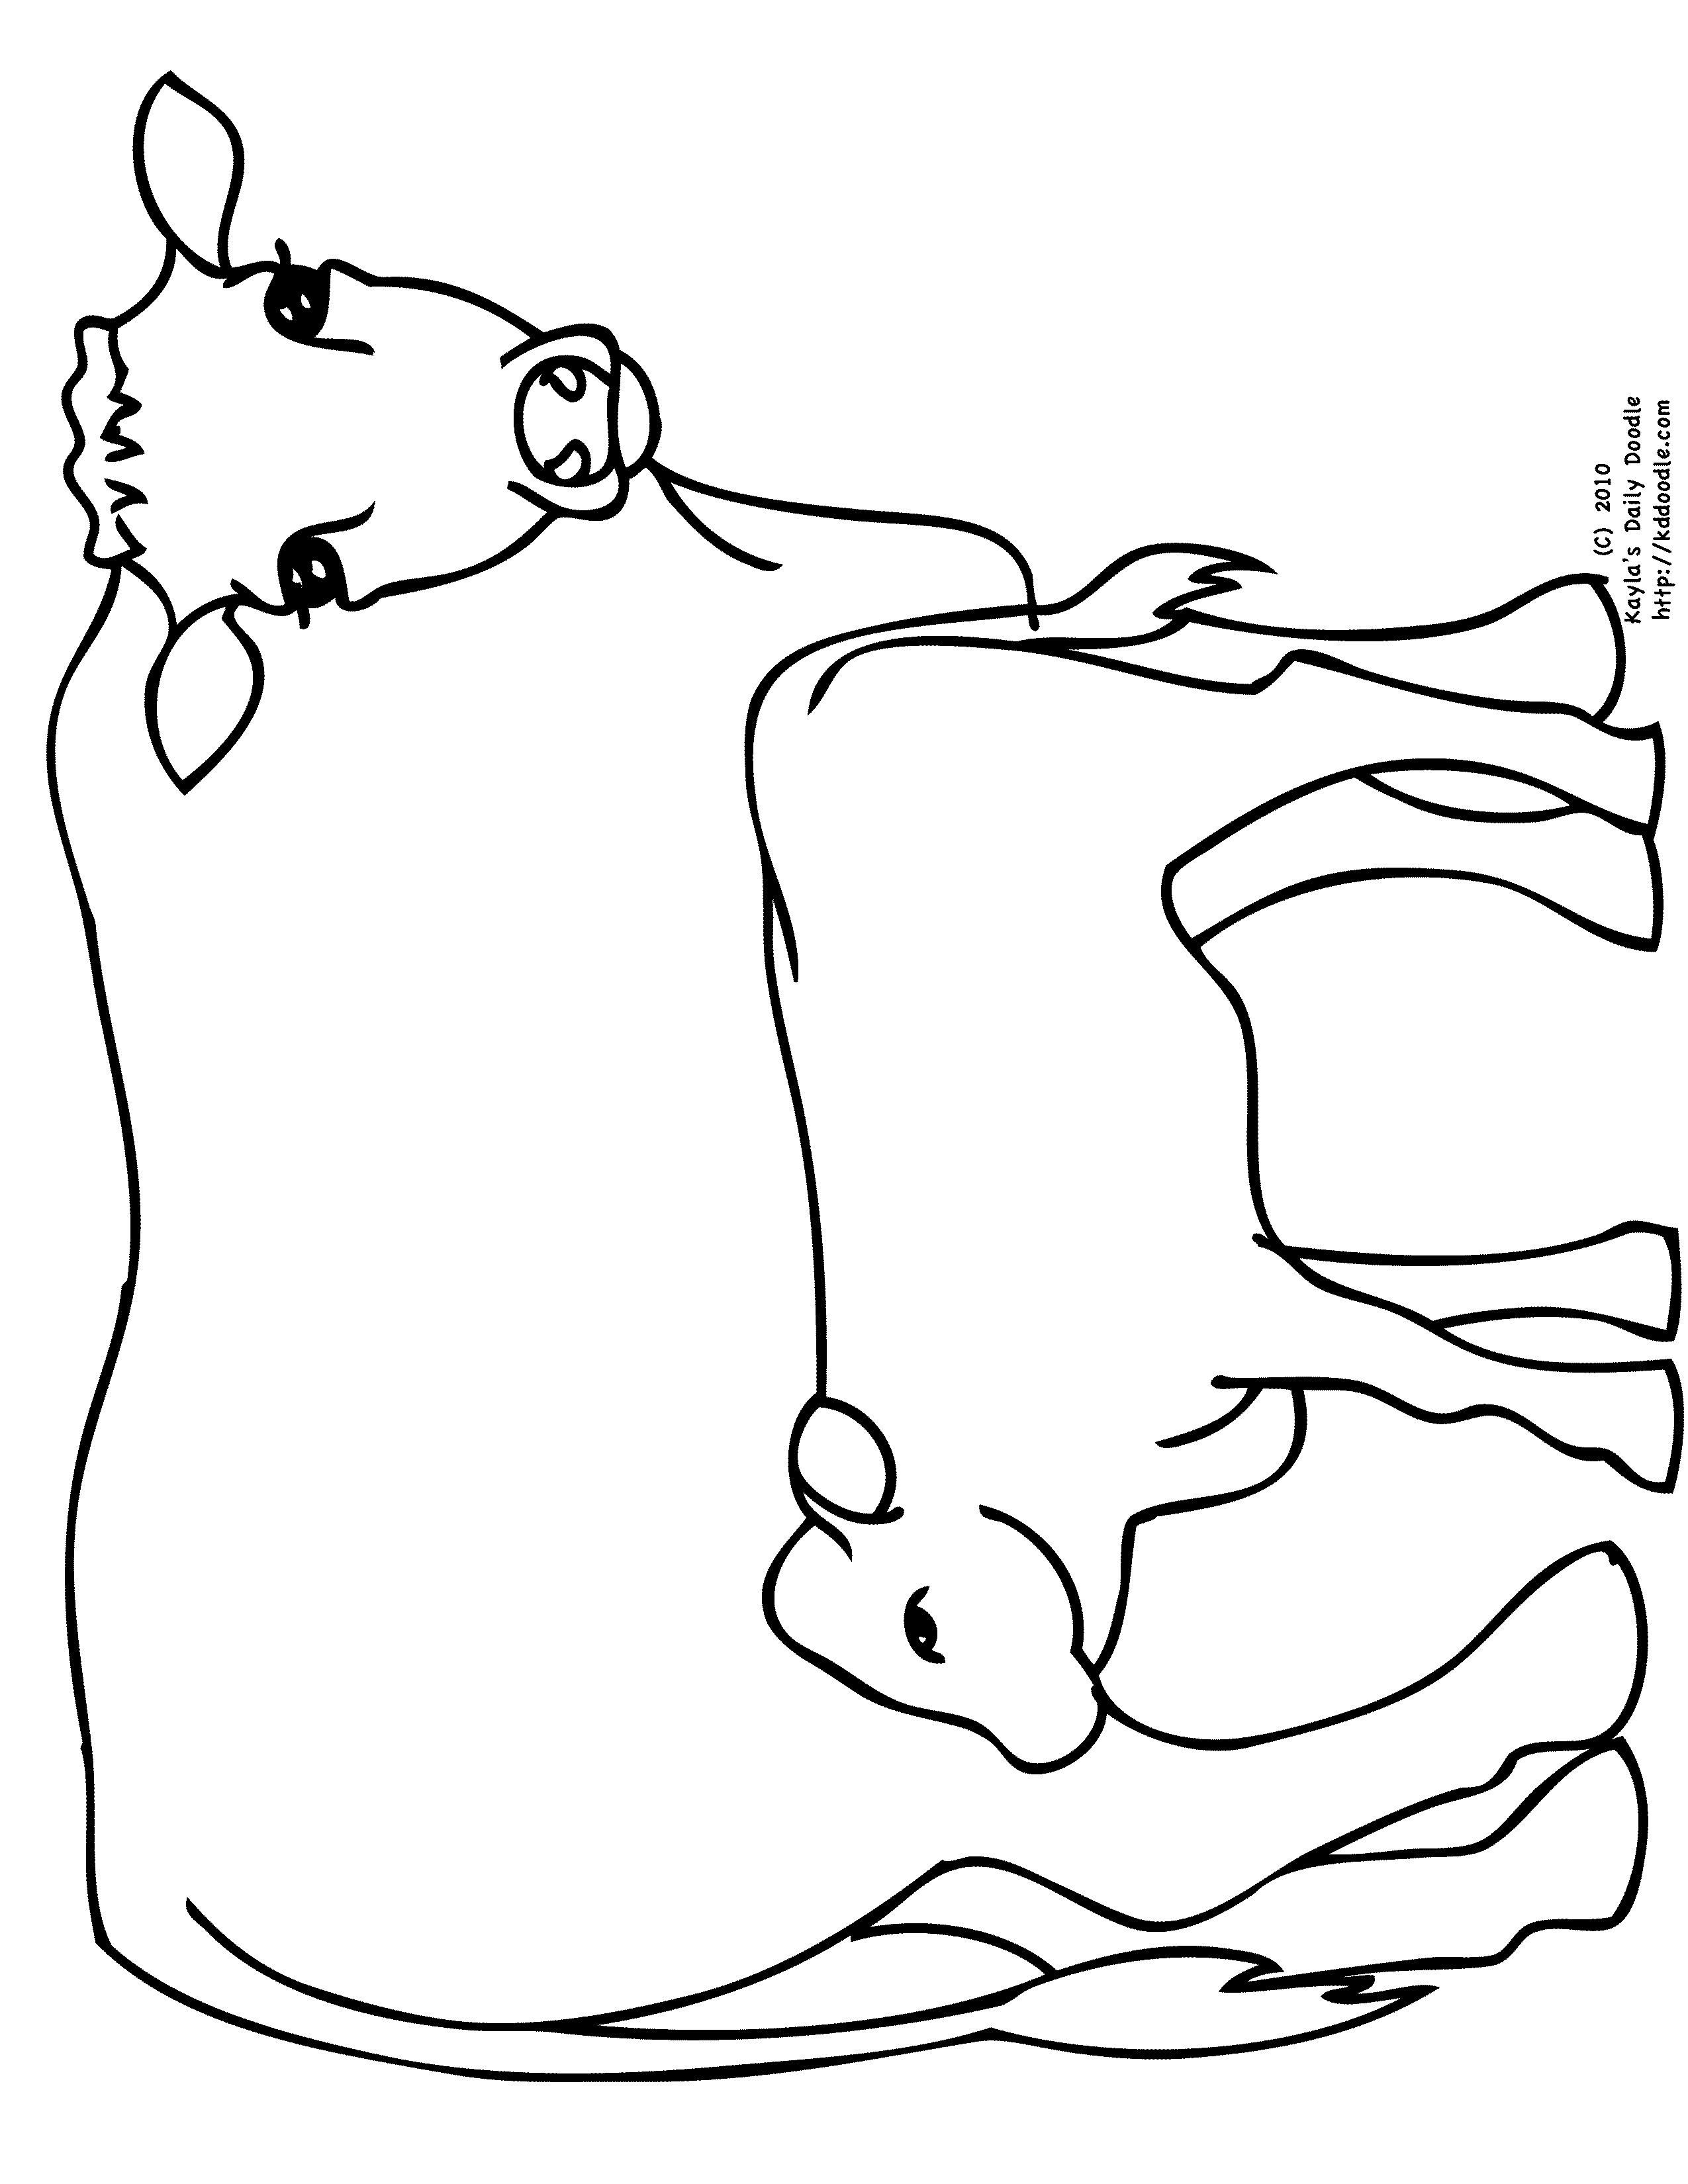 cow and calf coloring pages - Clip Art Library